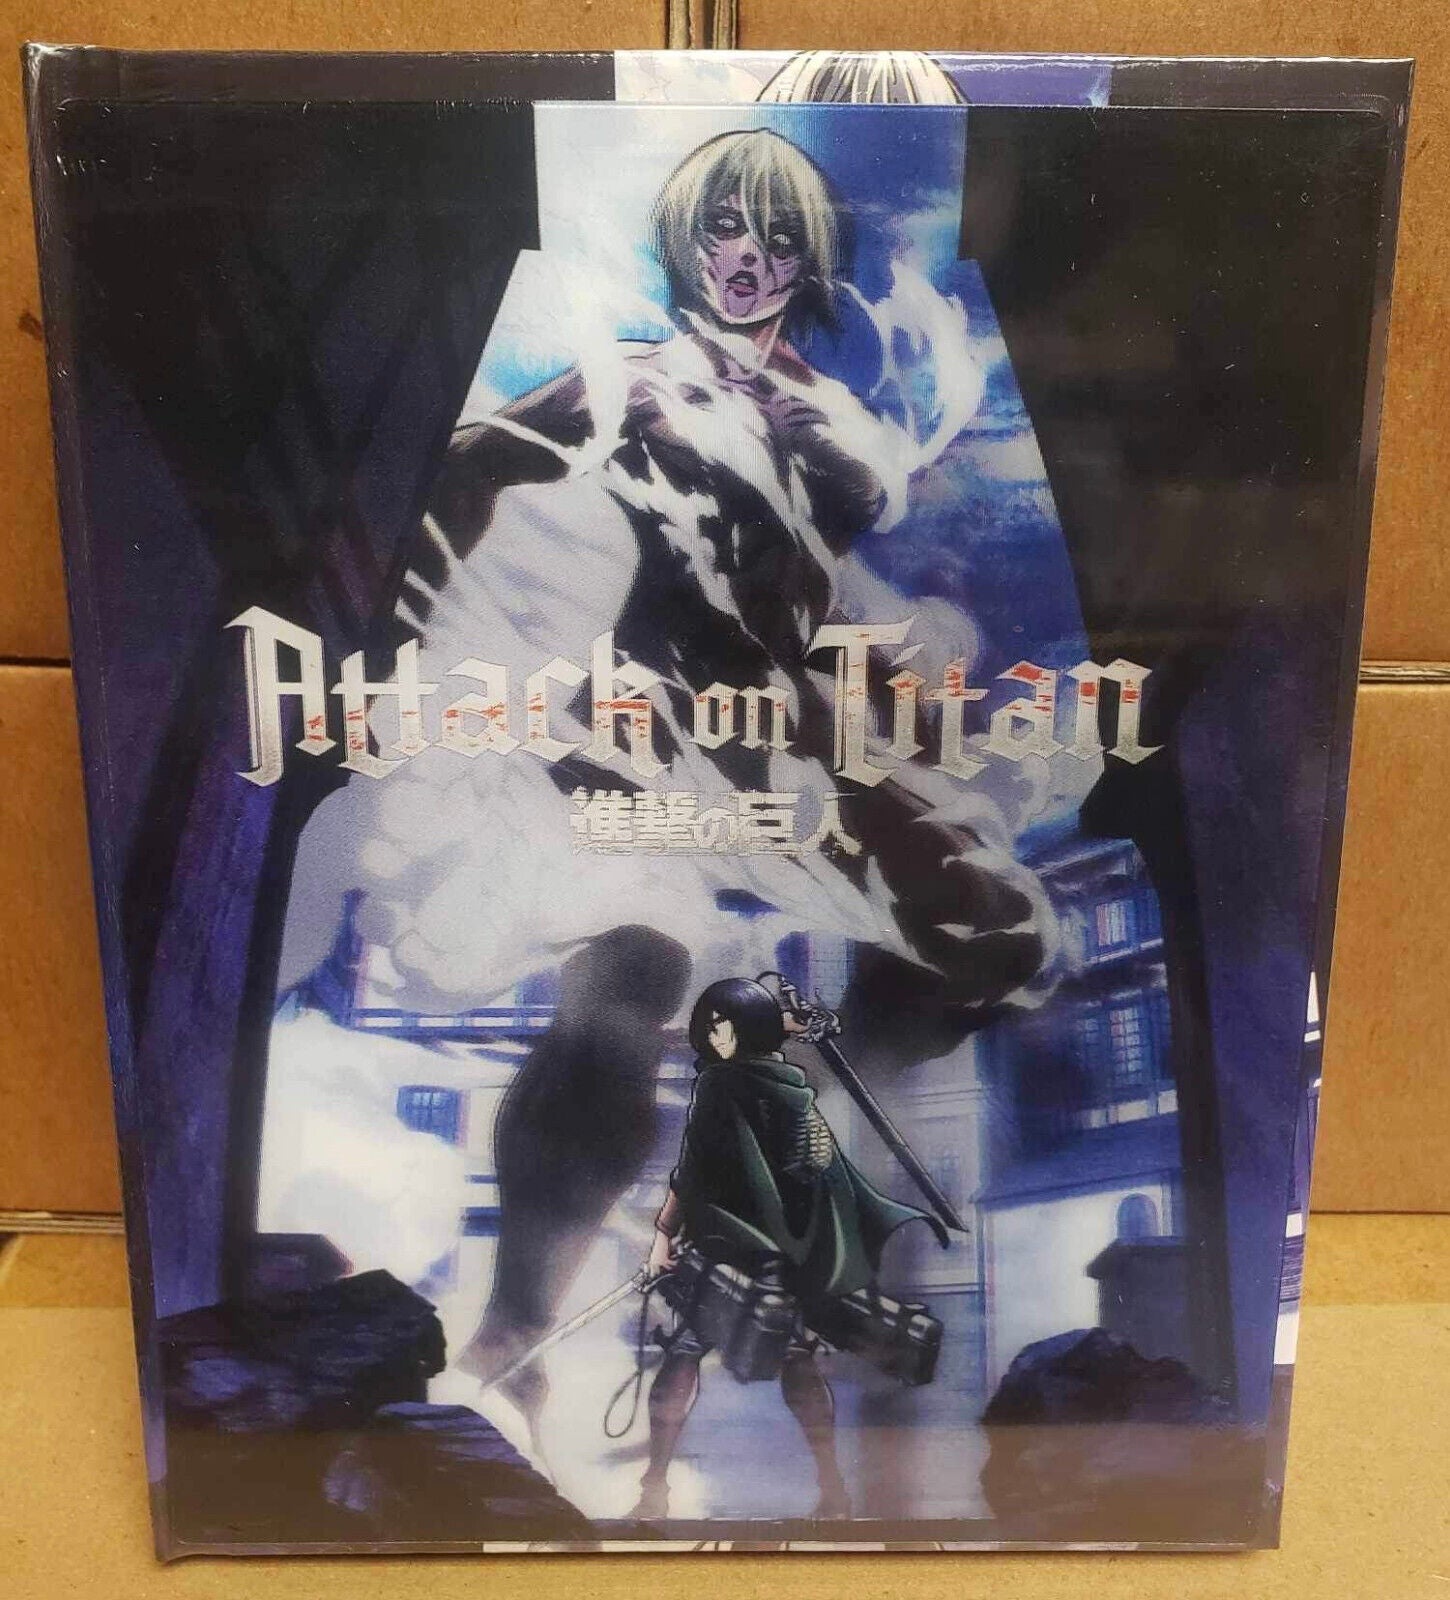 Attack on Titan Season 1 Limited Edition Part 2: Ep. 14-25, Blu-Ray + DVD Sealed